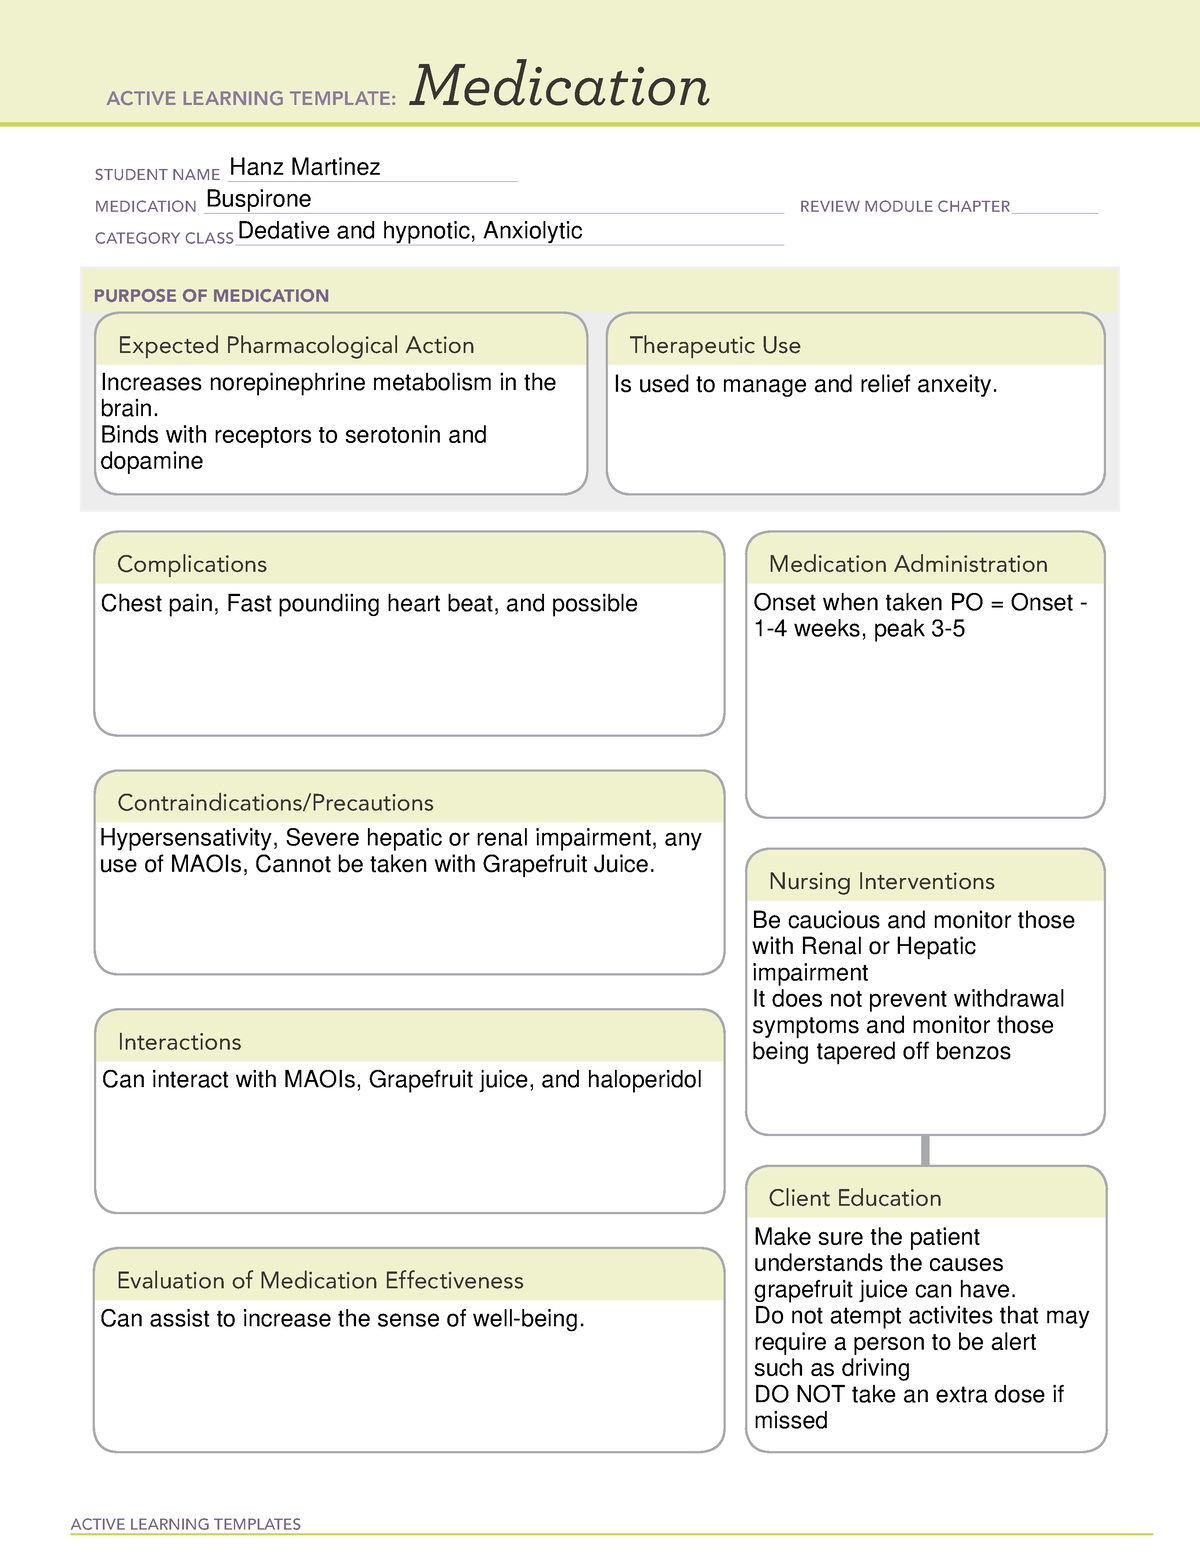 buspirone-medication-ati-template-active-learning-templates